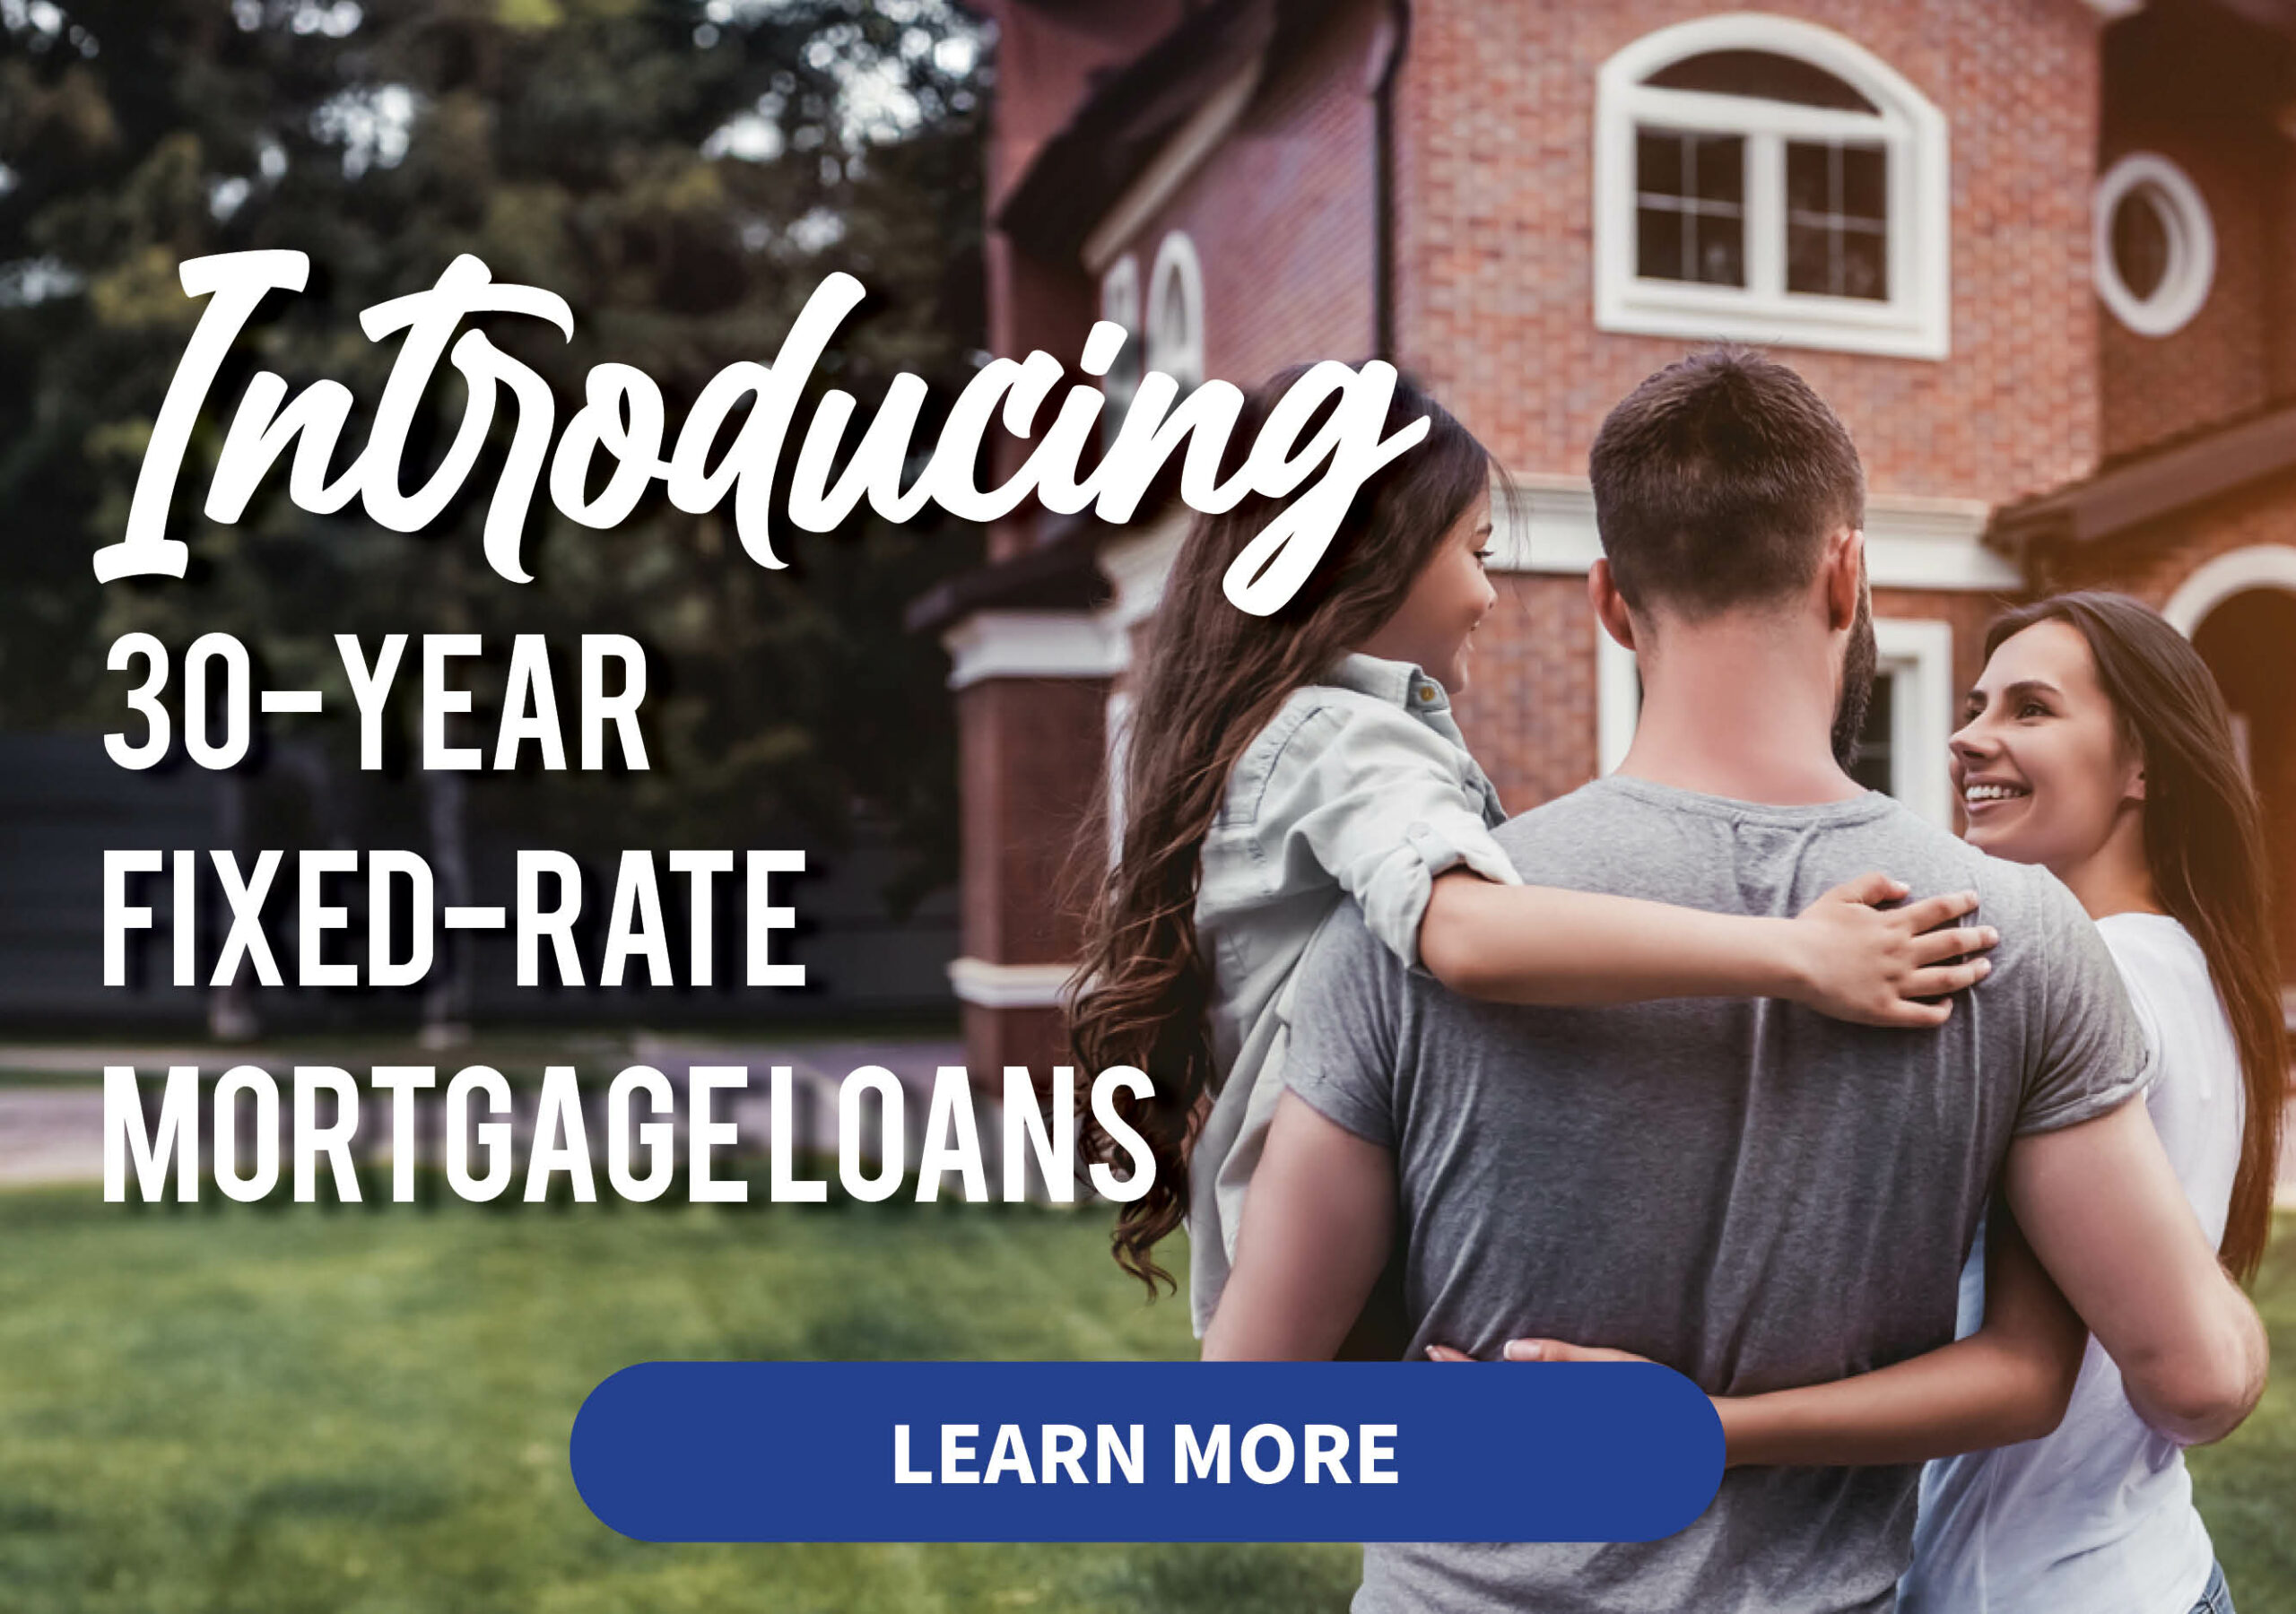 Image shows a happy family infront of their new home. Text reads "introducting 30 year fixed rate mortgage loans"